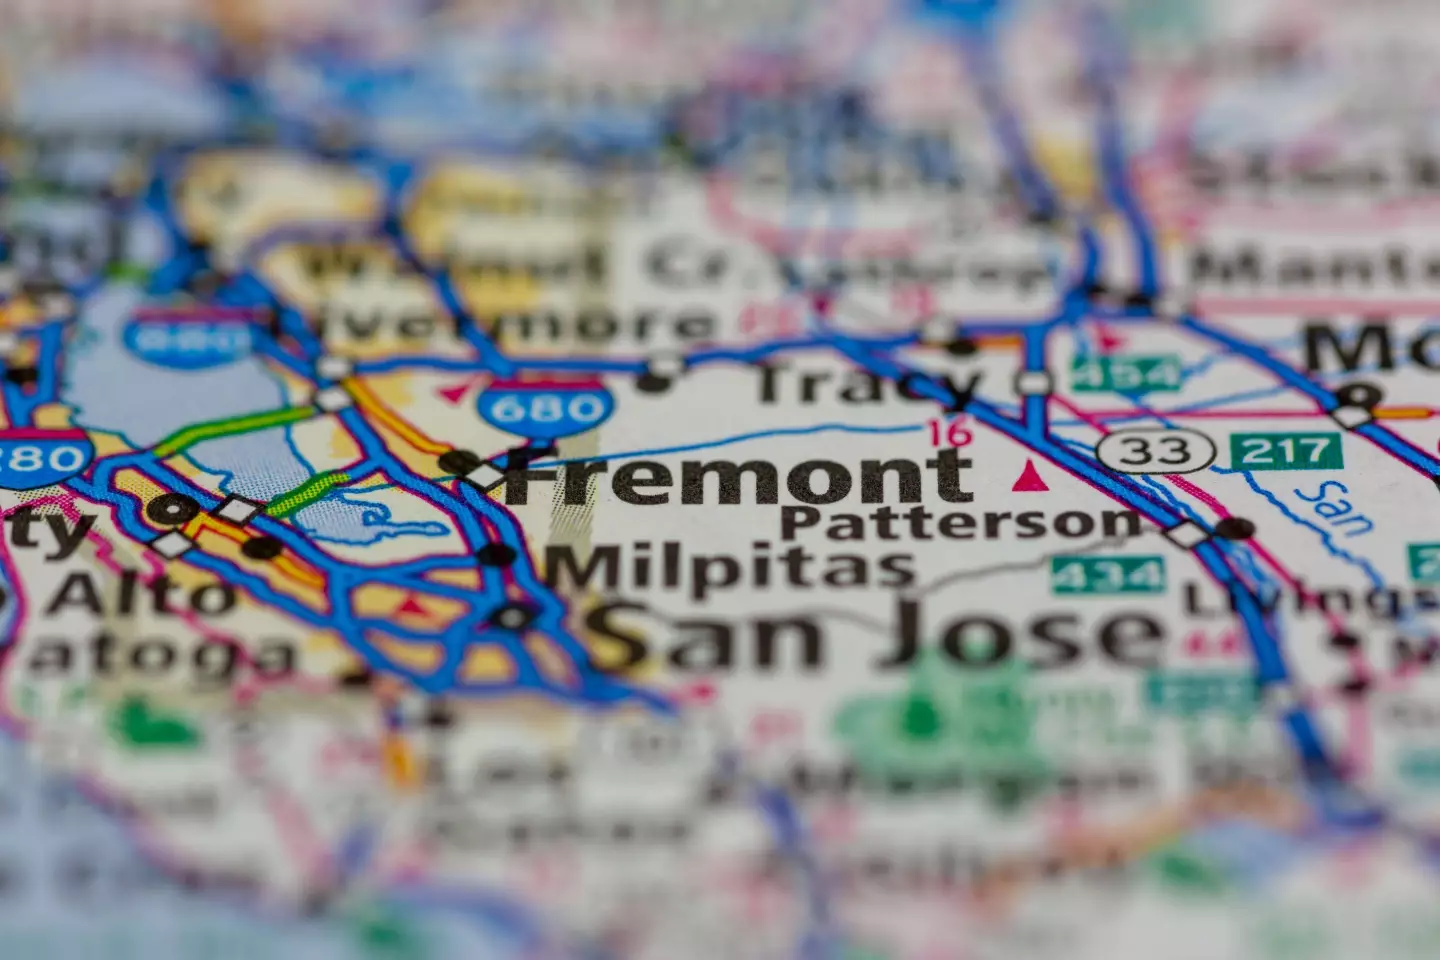 Fremont in Northern California hit the top of the charts again.